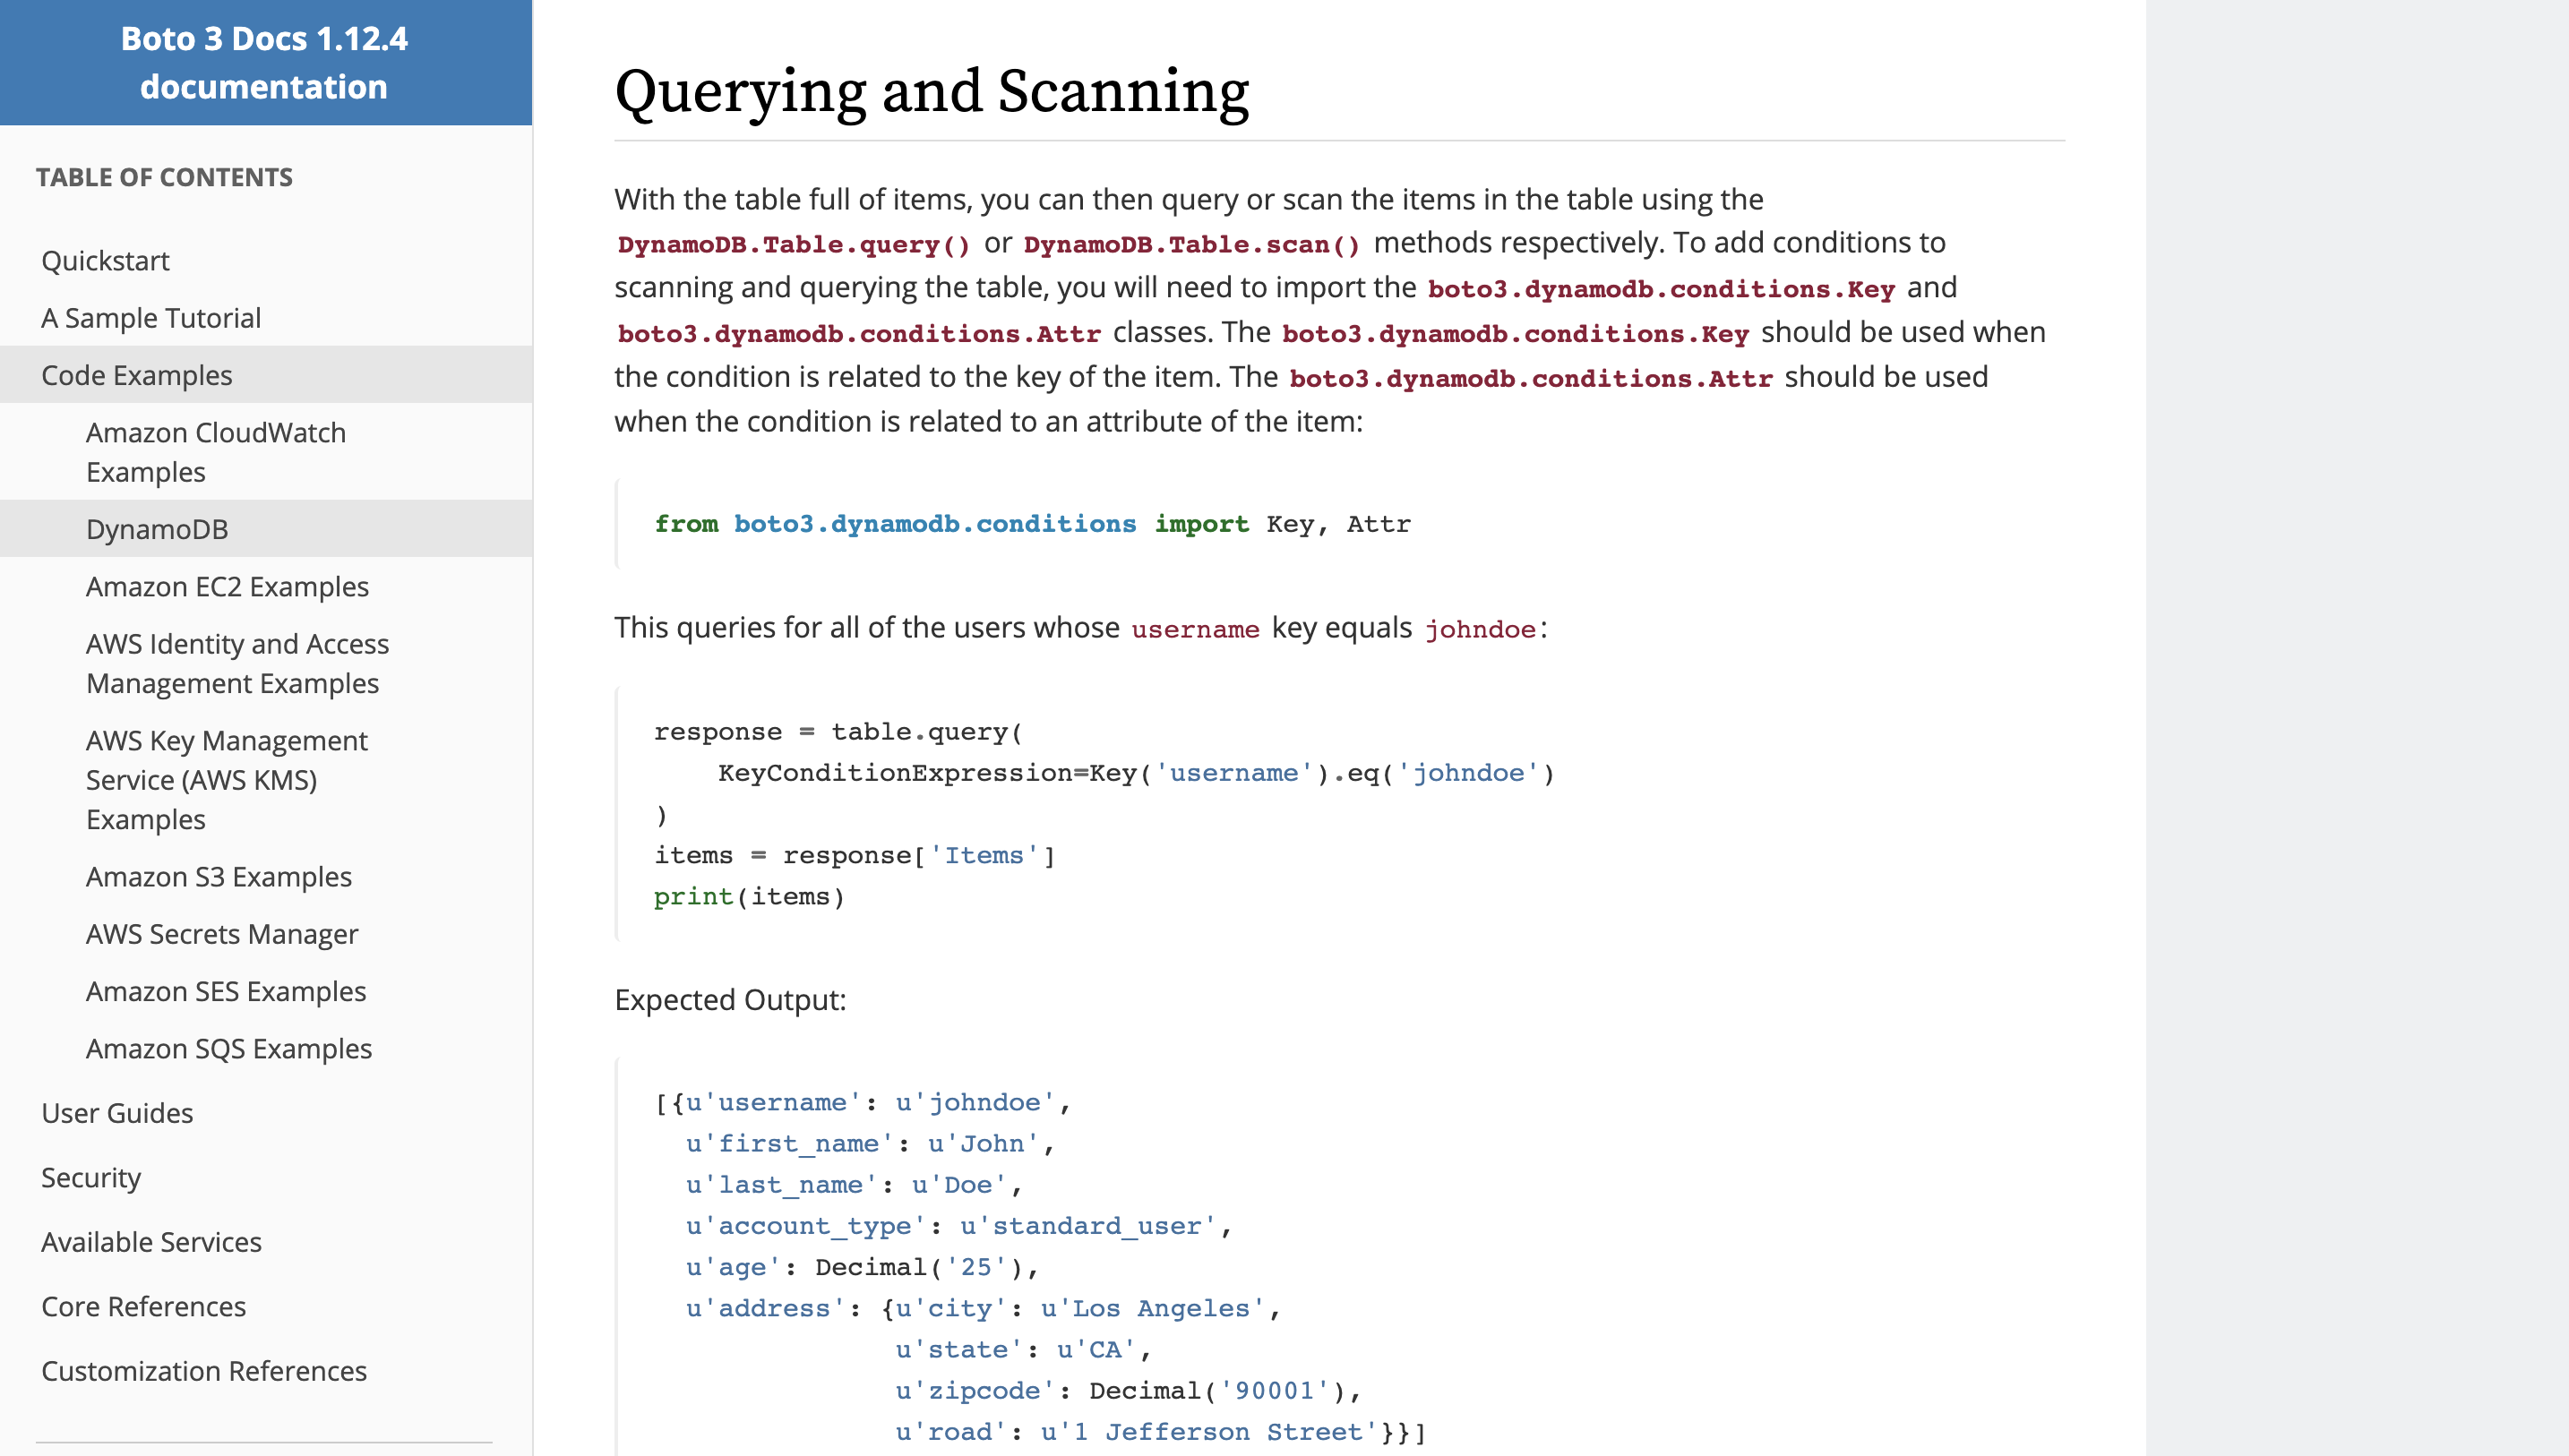 querying, scanning